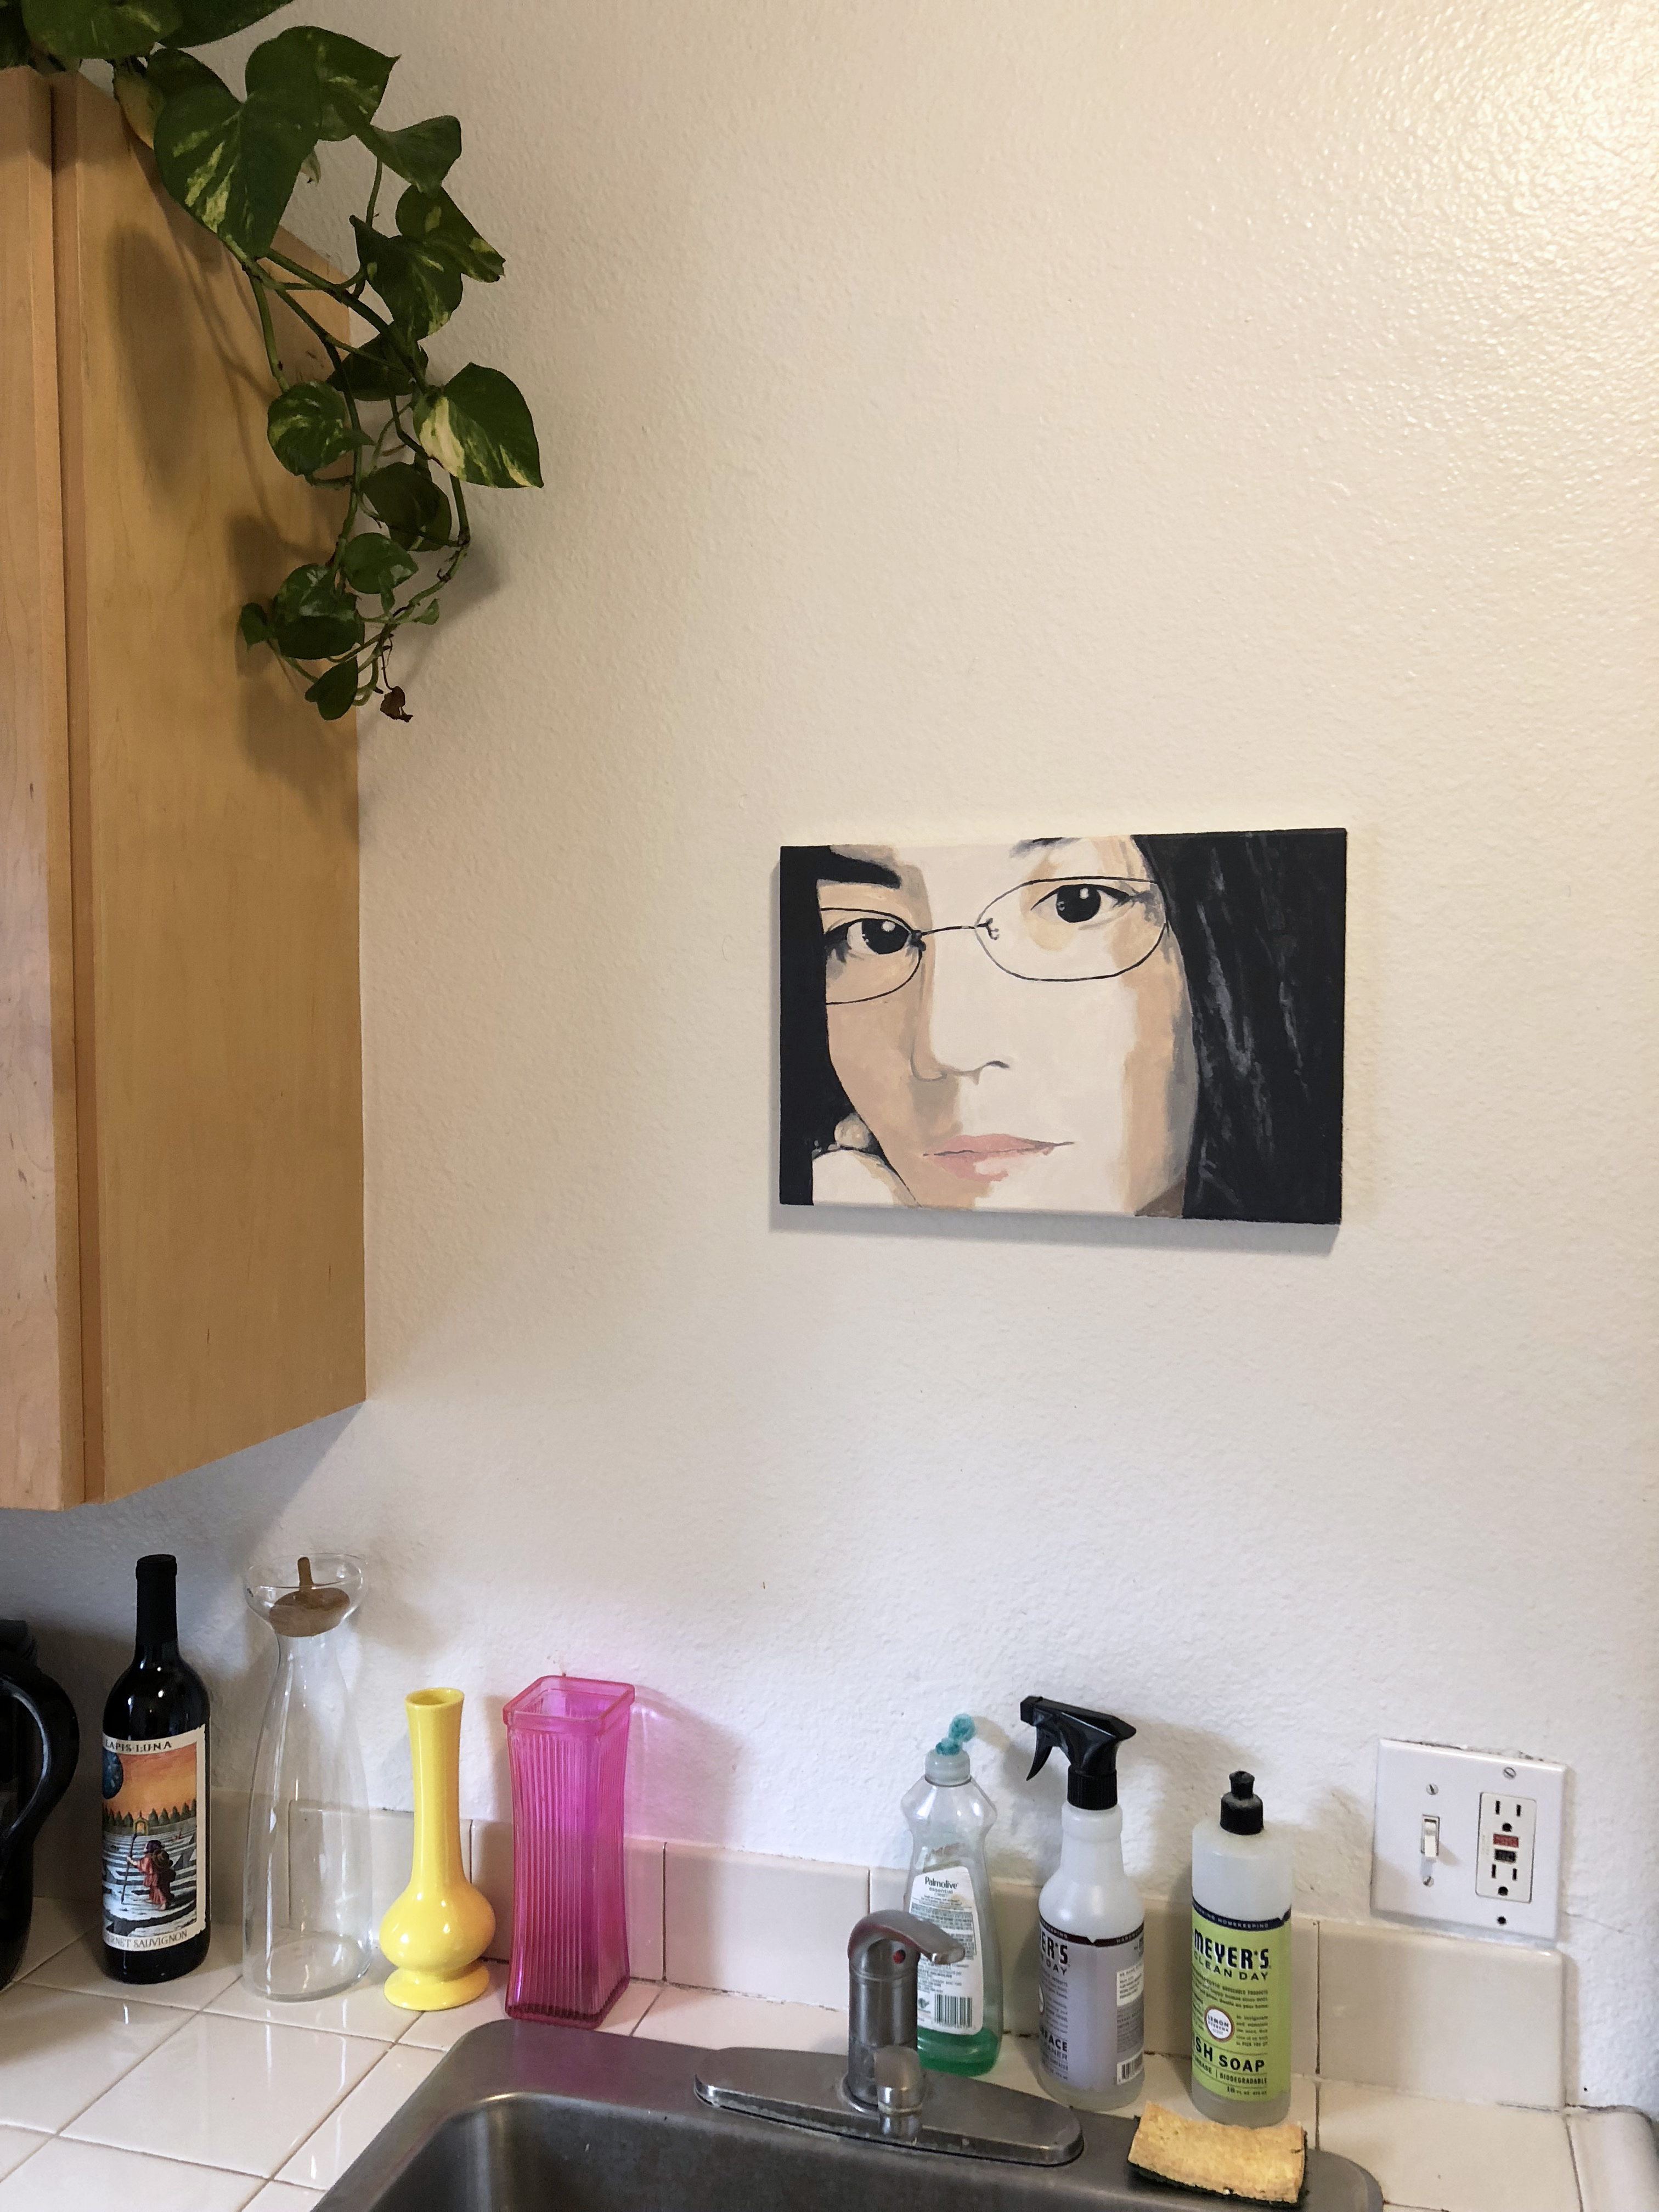 A small painting of Maye Wong, shot from the side above a kitchen sink